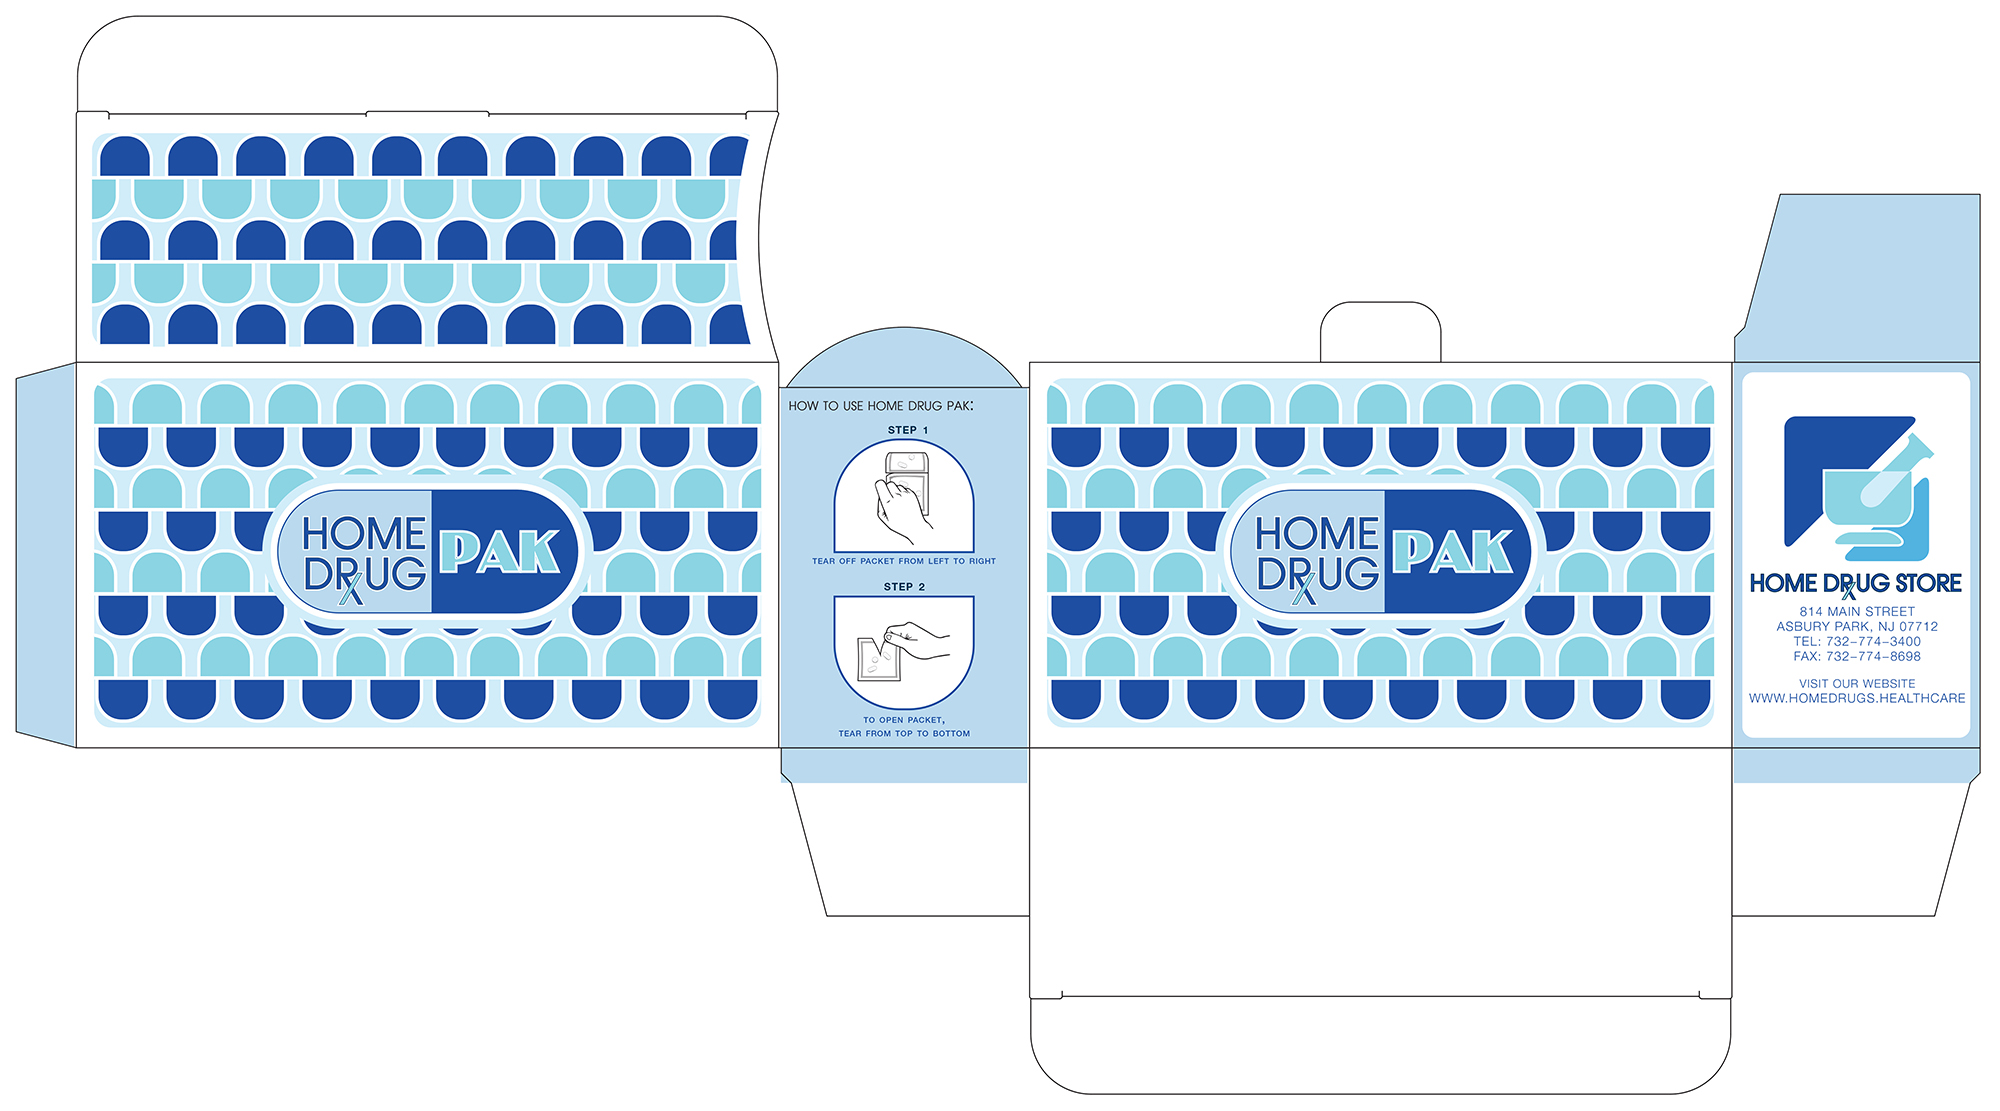 Packaging layout